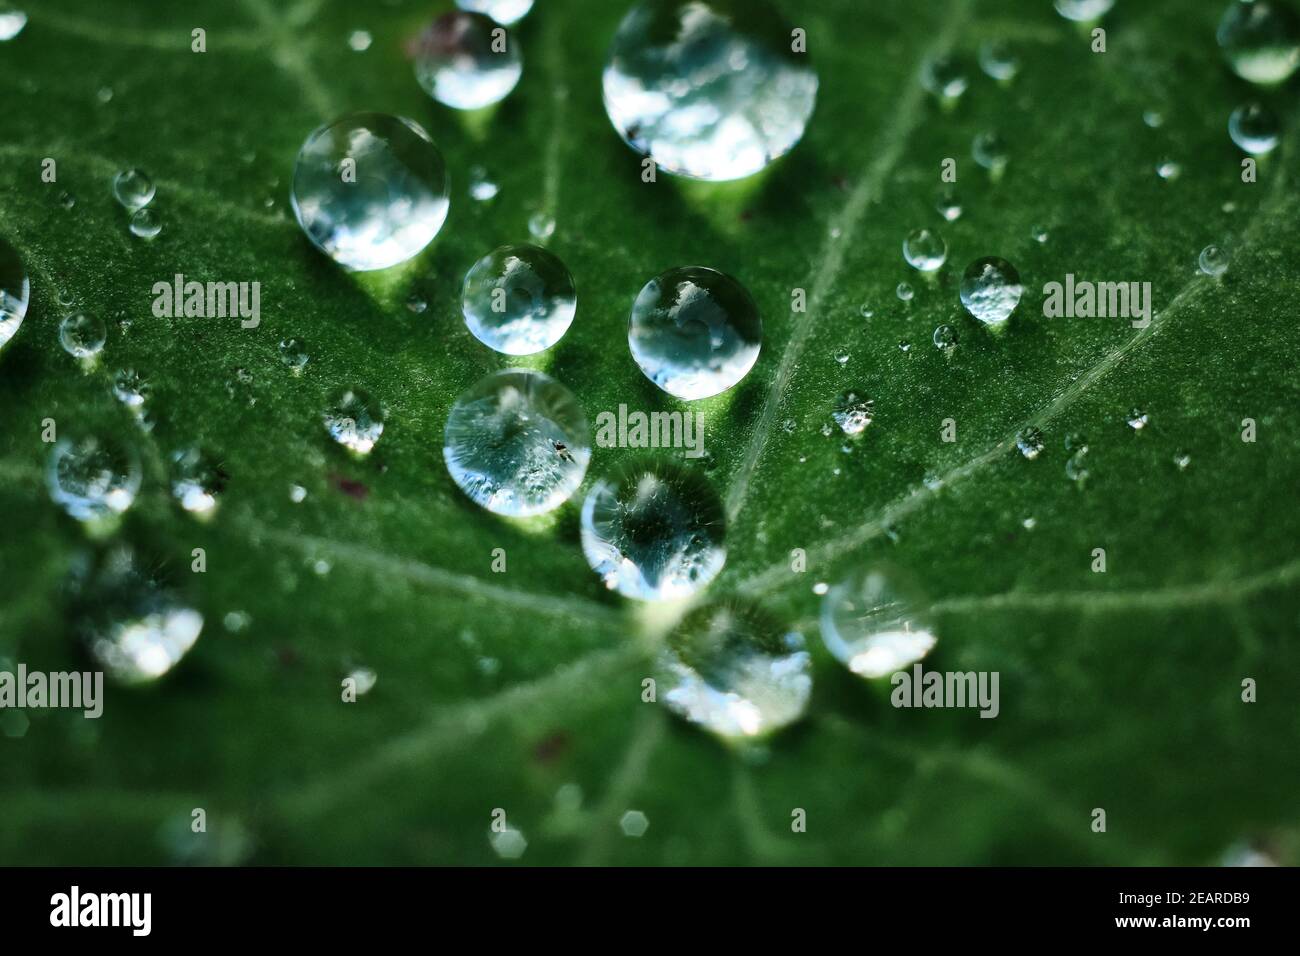 Glimmering Water Droplets on Green Leaf After Rainstorm Stock Photo